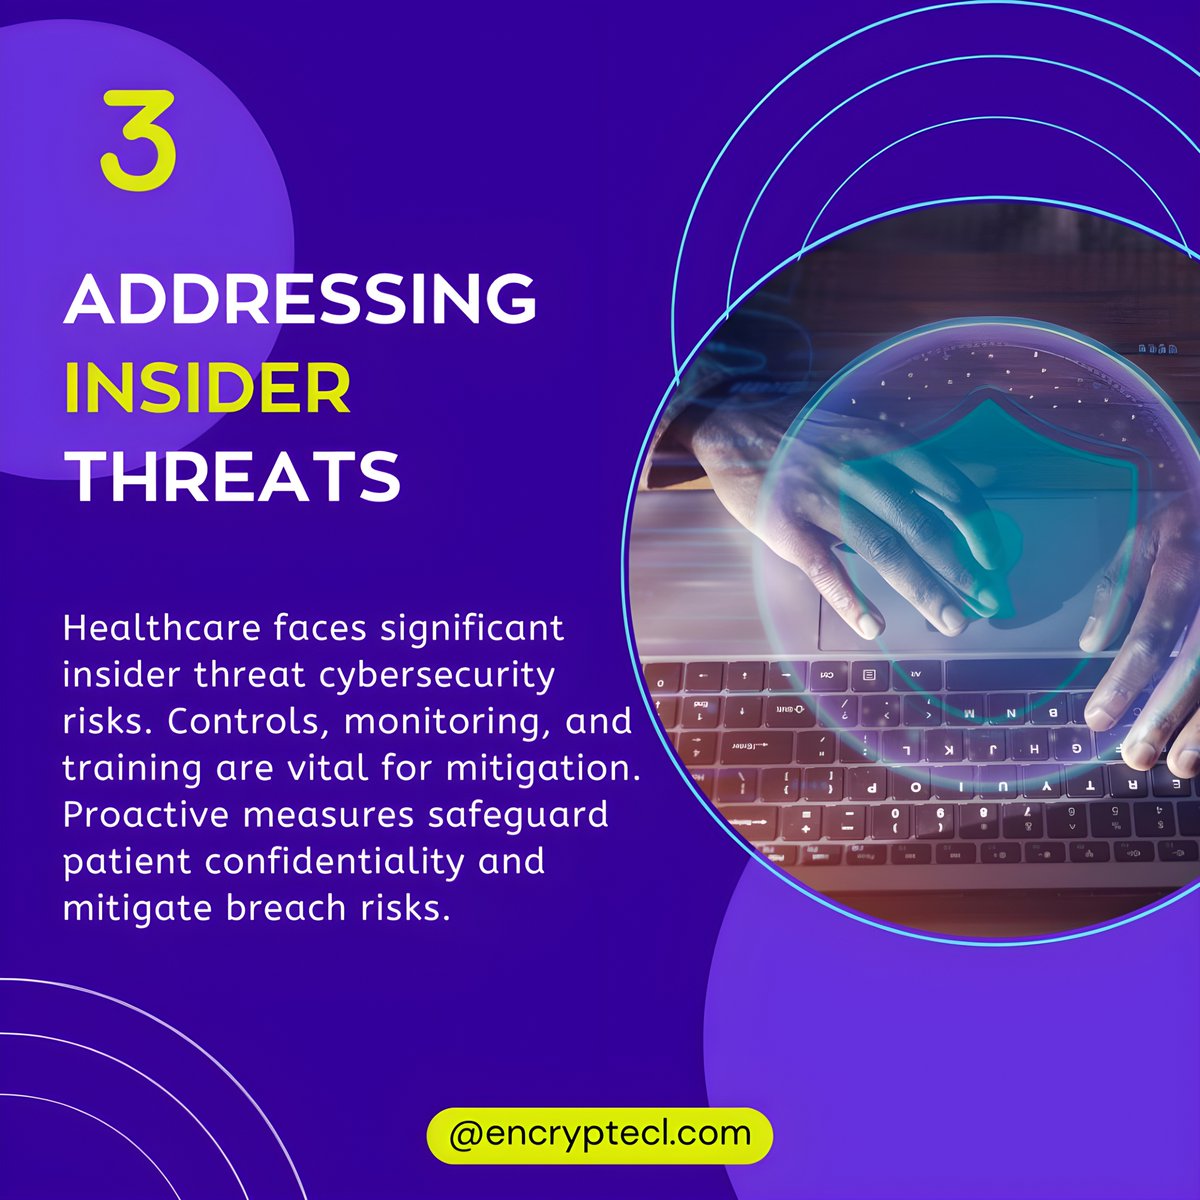 🔒 Protecting Healthcare Data: Essential Cybersecurity Tips! 🔒
1️⃣ Stop Ransomware: Segmentation, backups, training.
2️⃣ Secure Telemedicine: Encryption, privacy.
3️⃣ Watch for Insiders: Controls, monitoring.

Stay safe! #HealthcareCybersecurity #encryptecl #PatientPrivacy